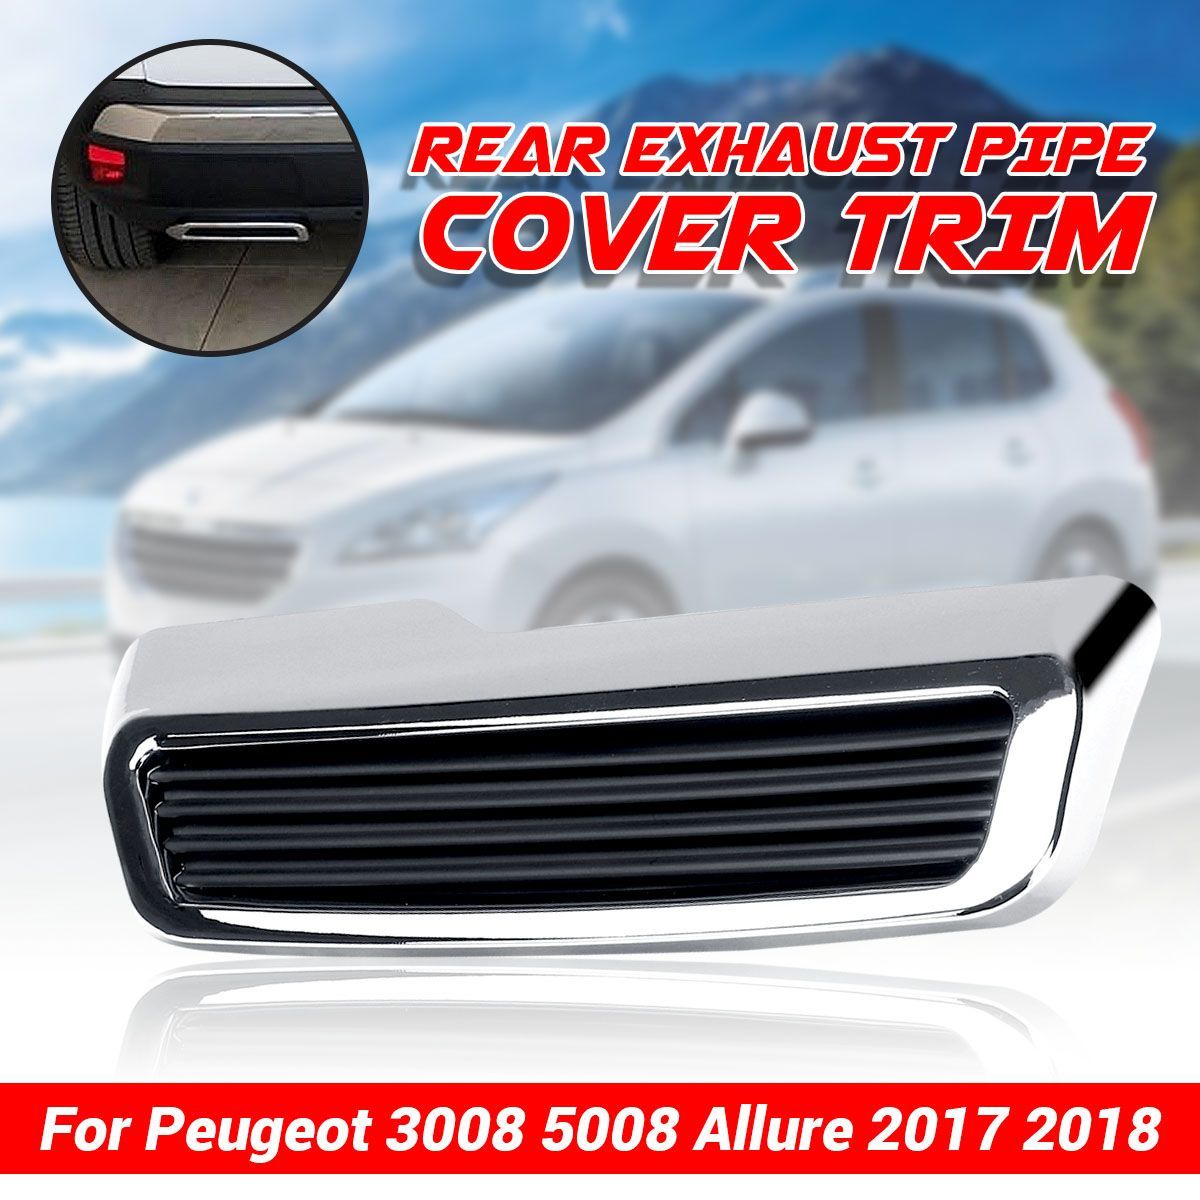 Rear-Exhaust-Muffler-Pipe-End-Trim-Cover-For-Peugeot-3008-5008-Allure-2017-2019-1725989